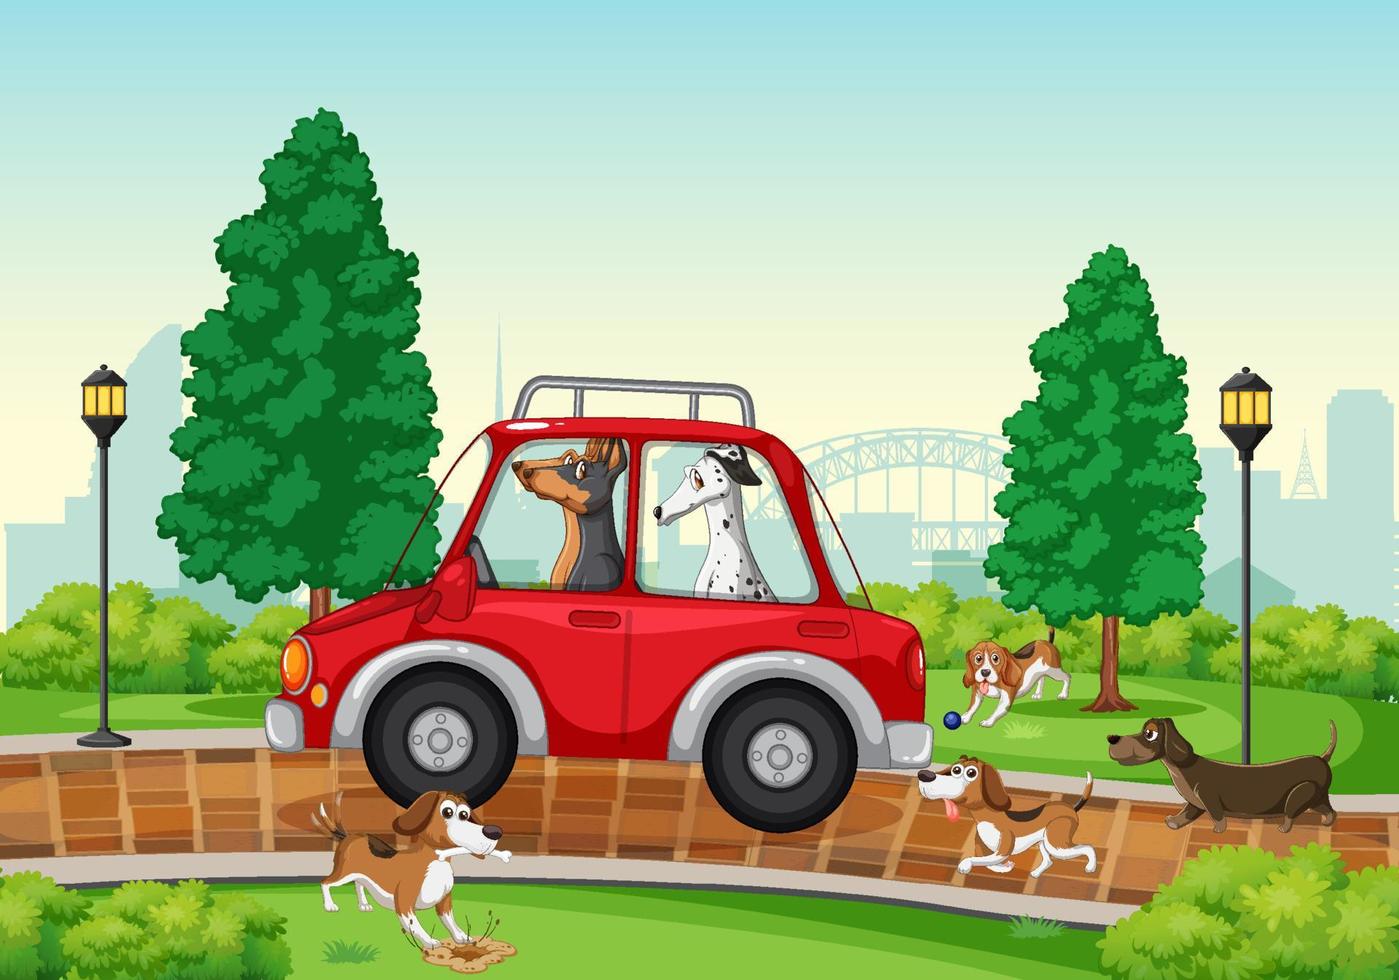 Many dogs playing in the park vector